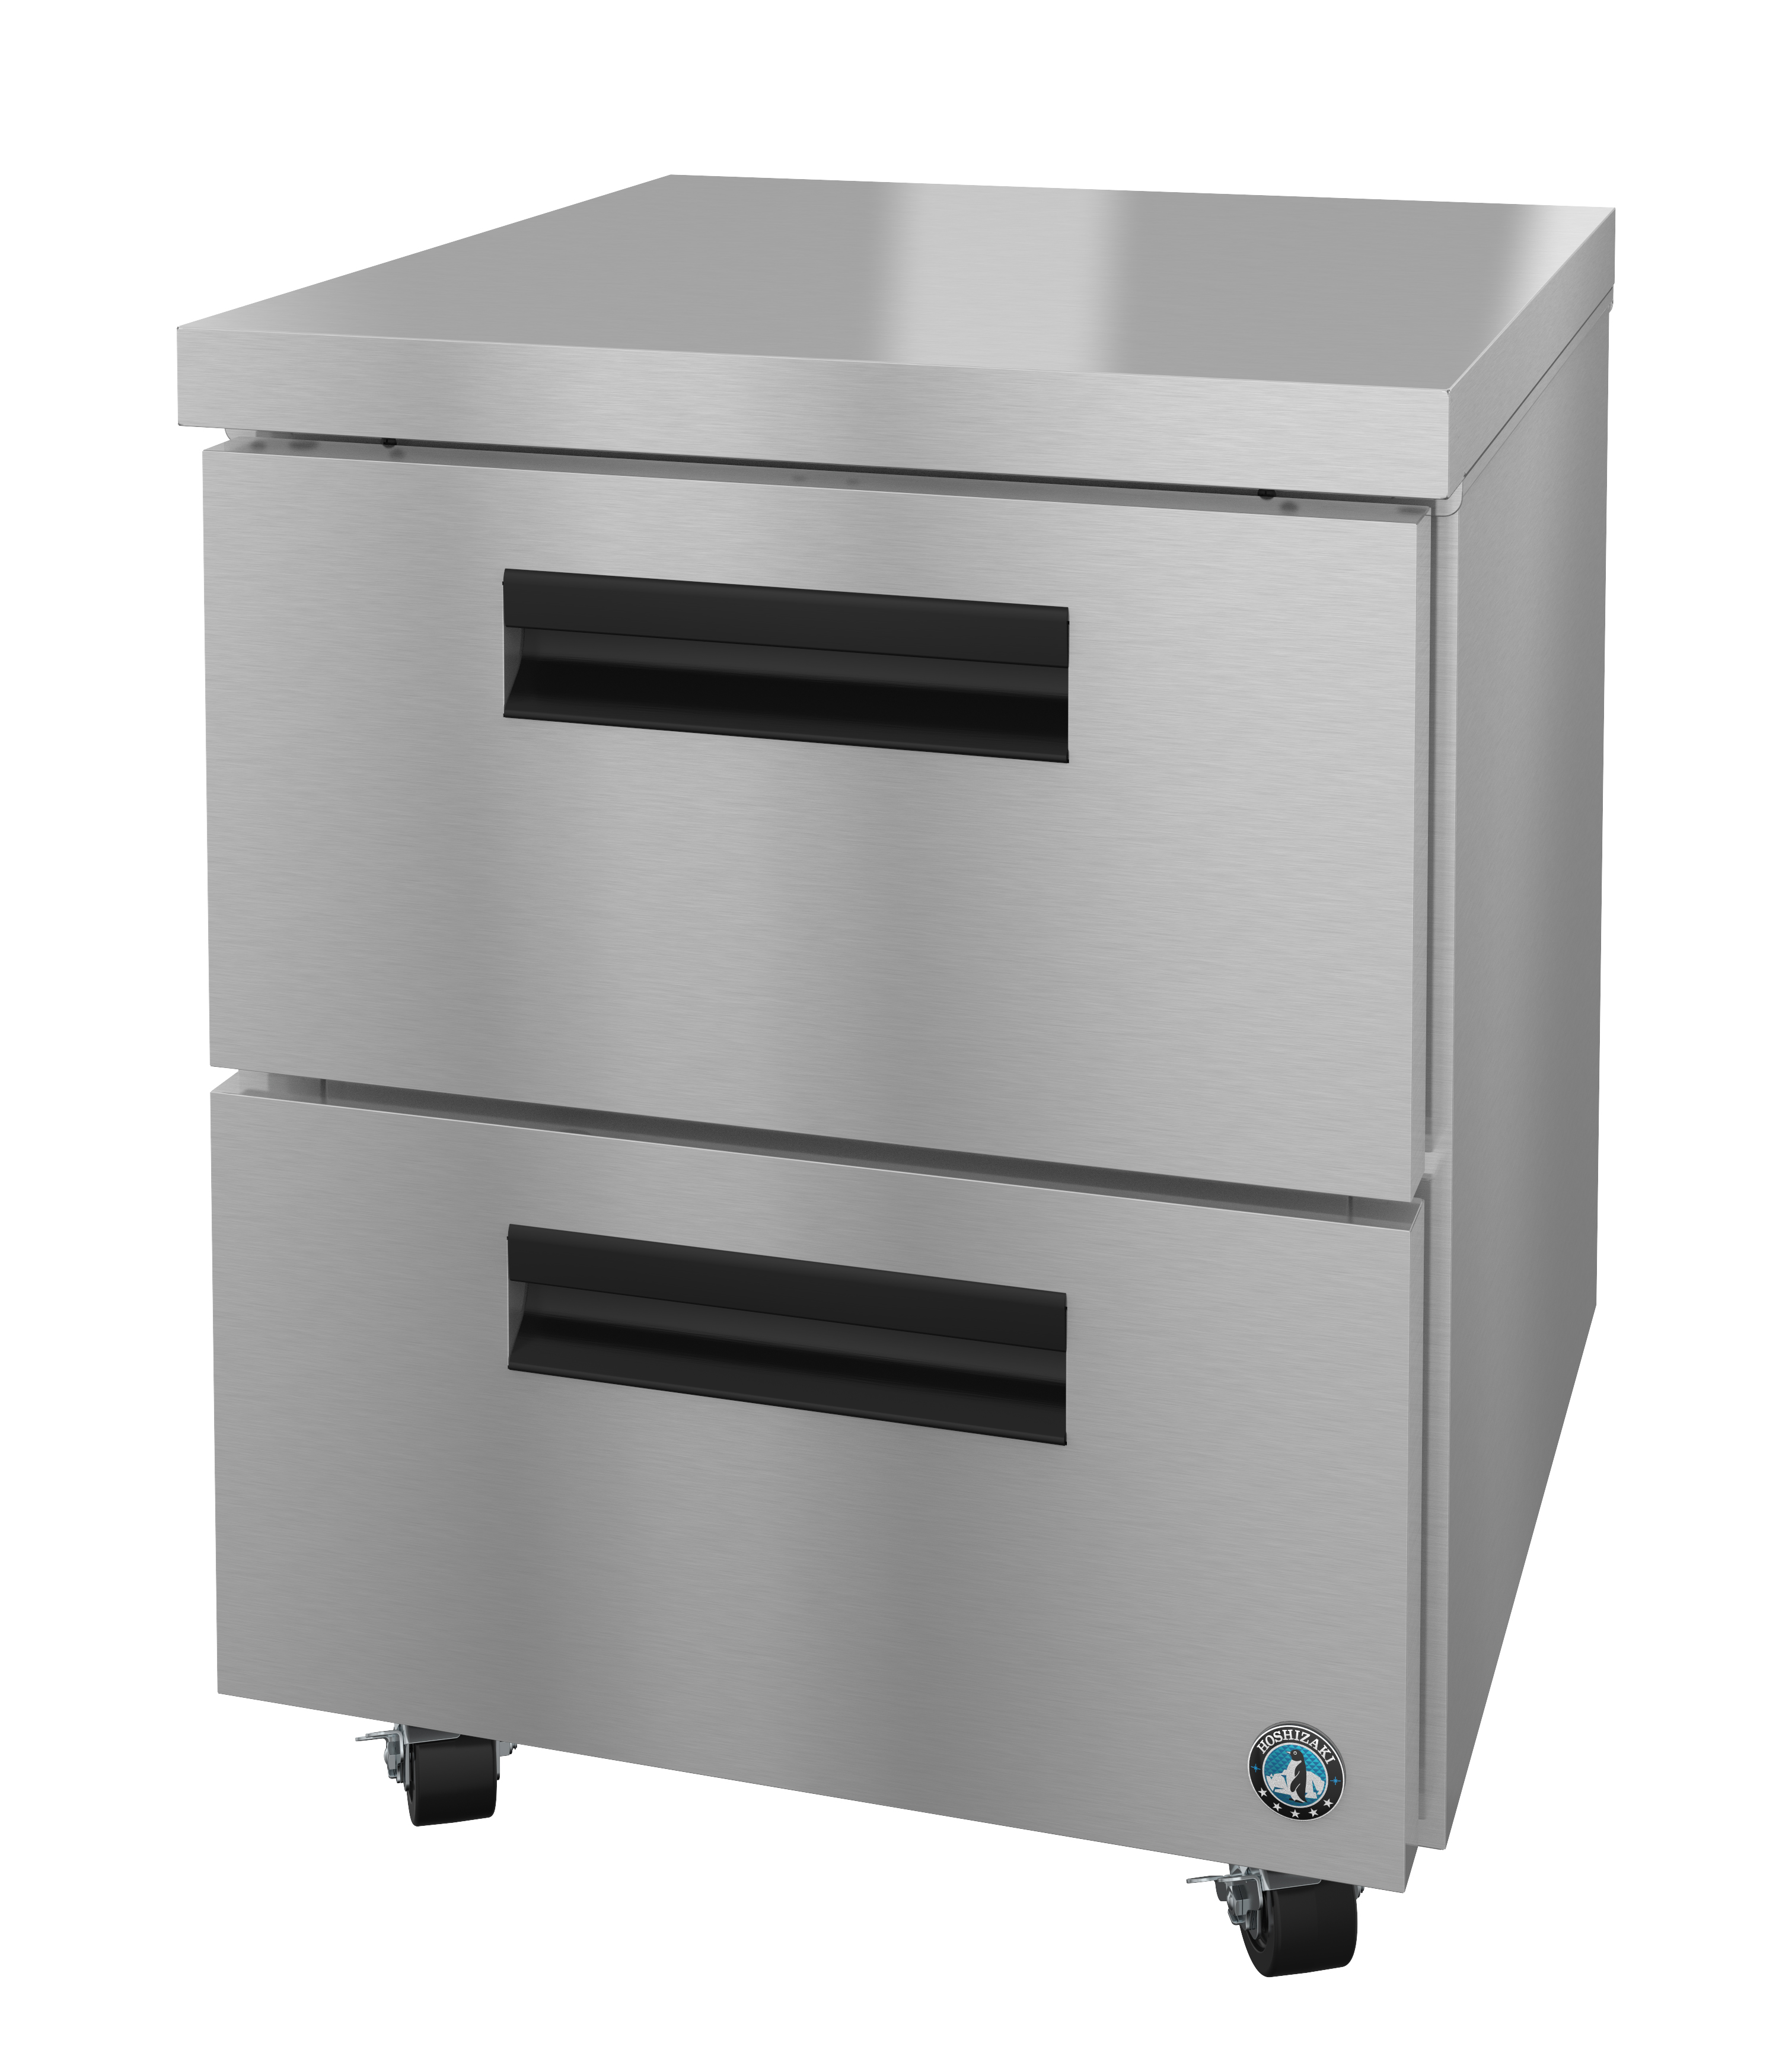 CRMR27-D, Refrigerator, Single Section Undercounter, Stainless Drawers